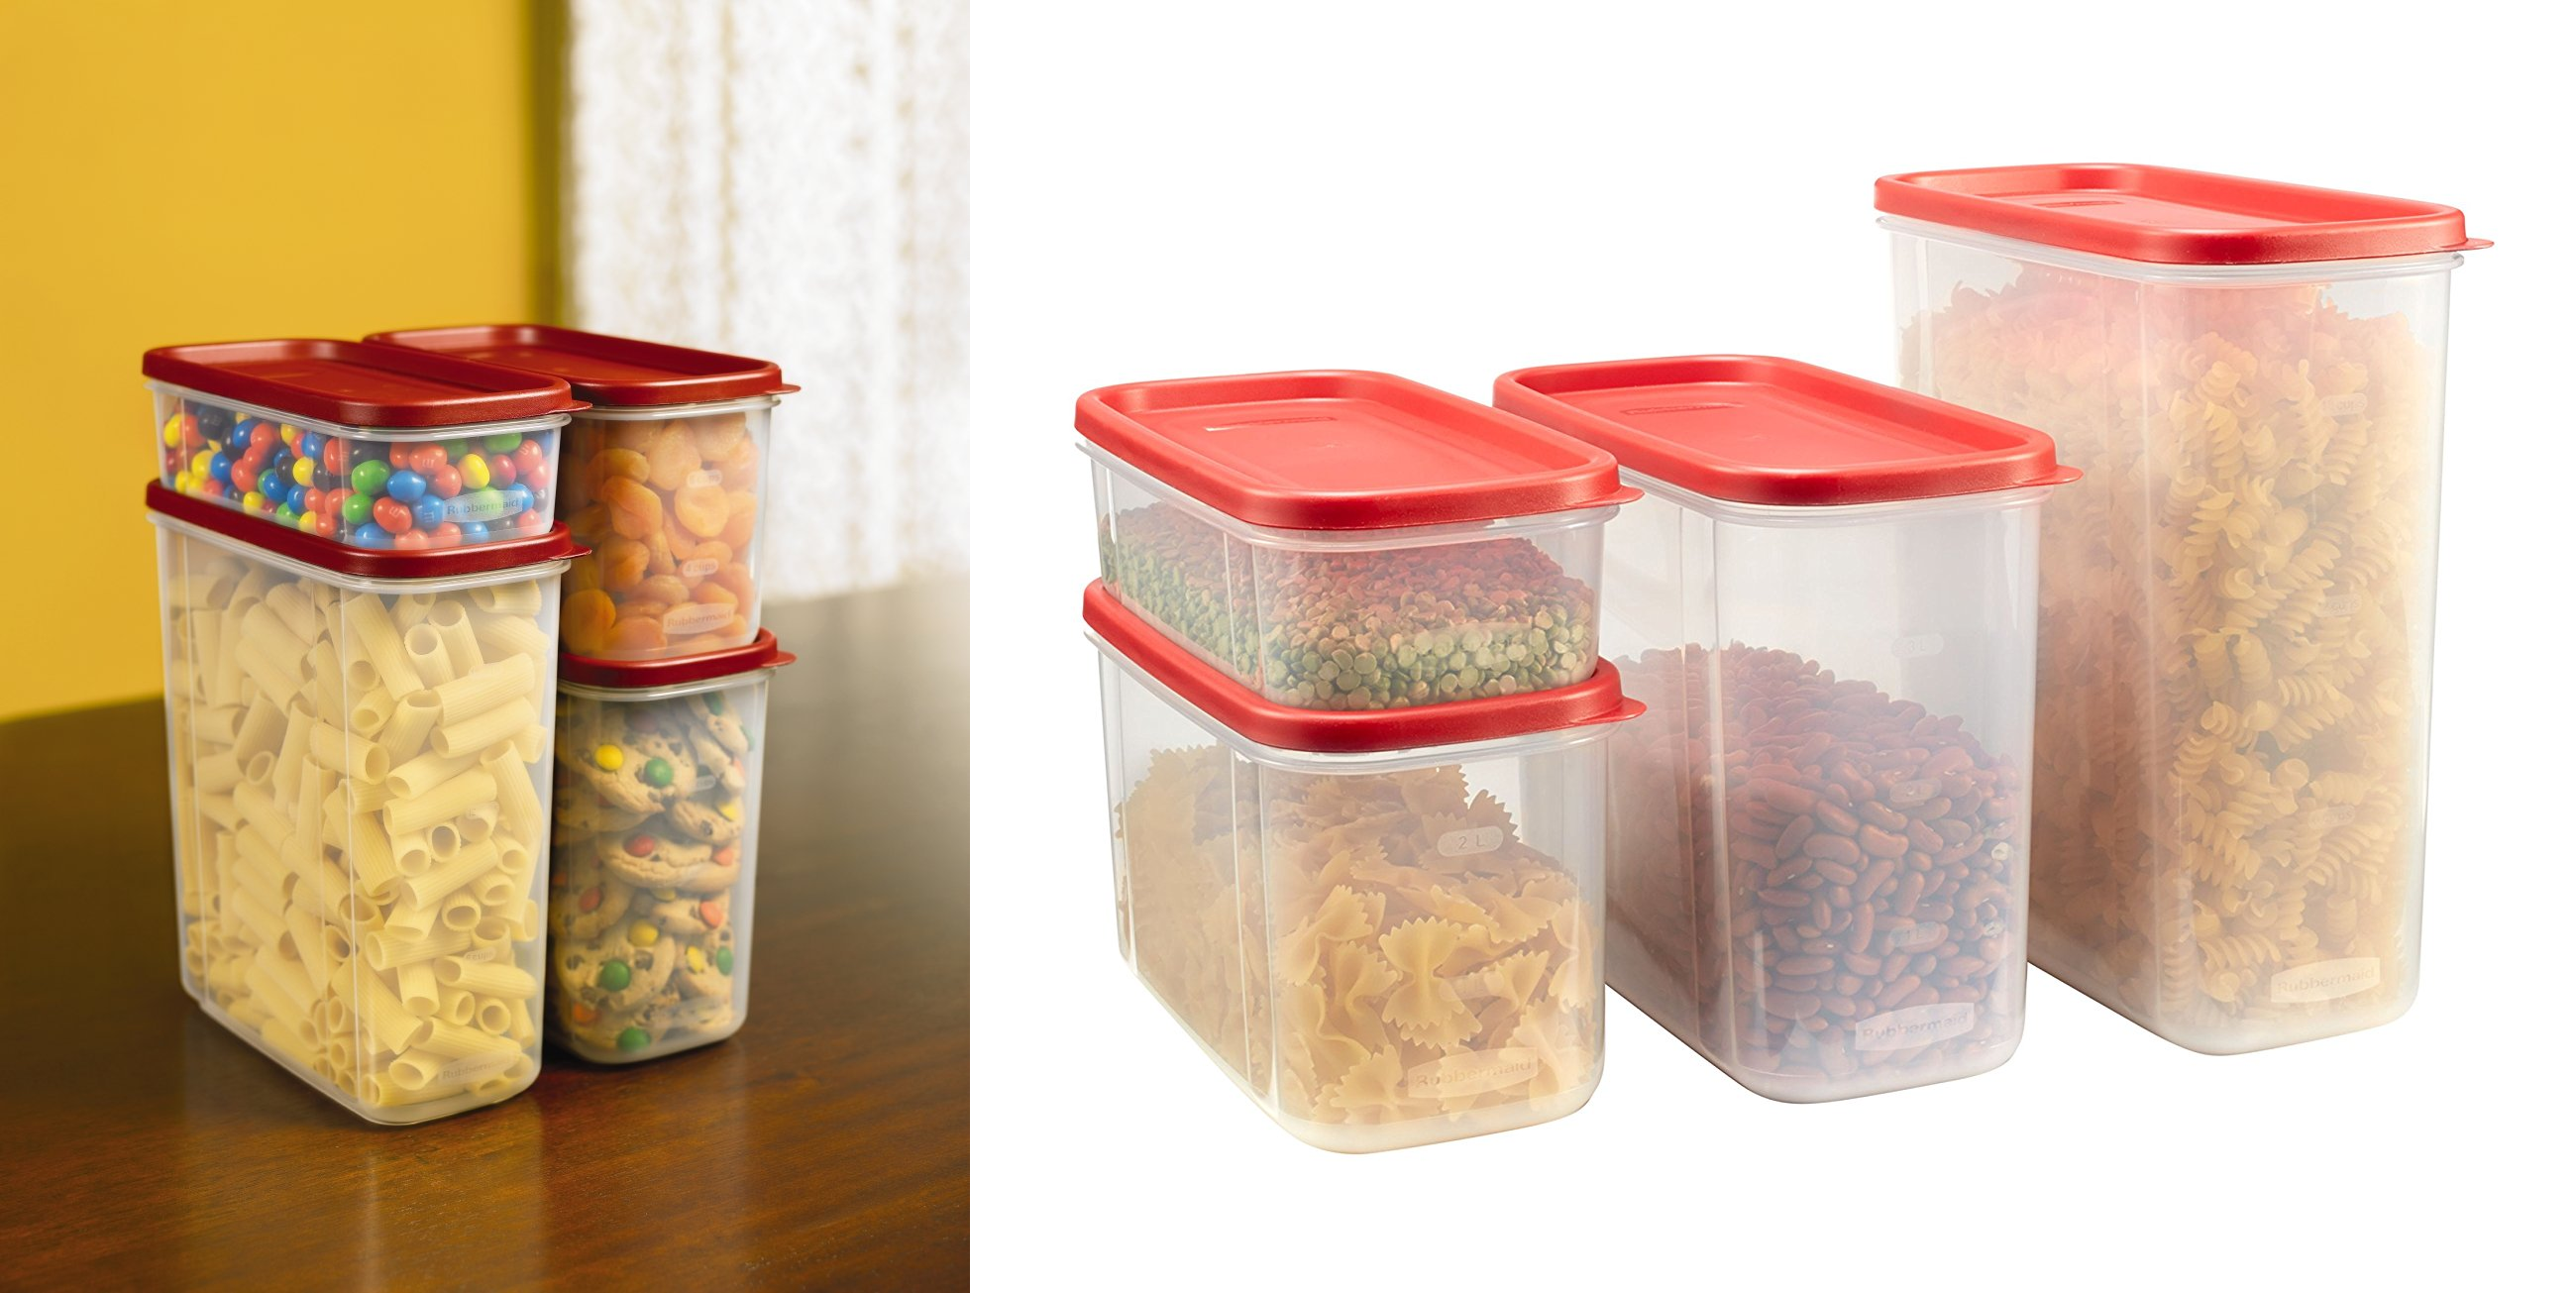 Rubbermaid 8-pc Modular Food Canister Set Only $15.49!